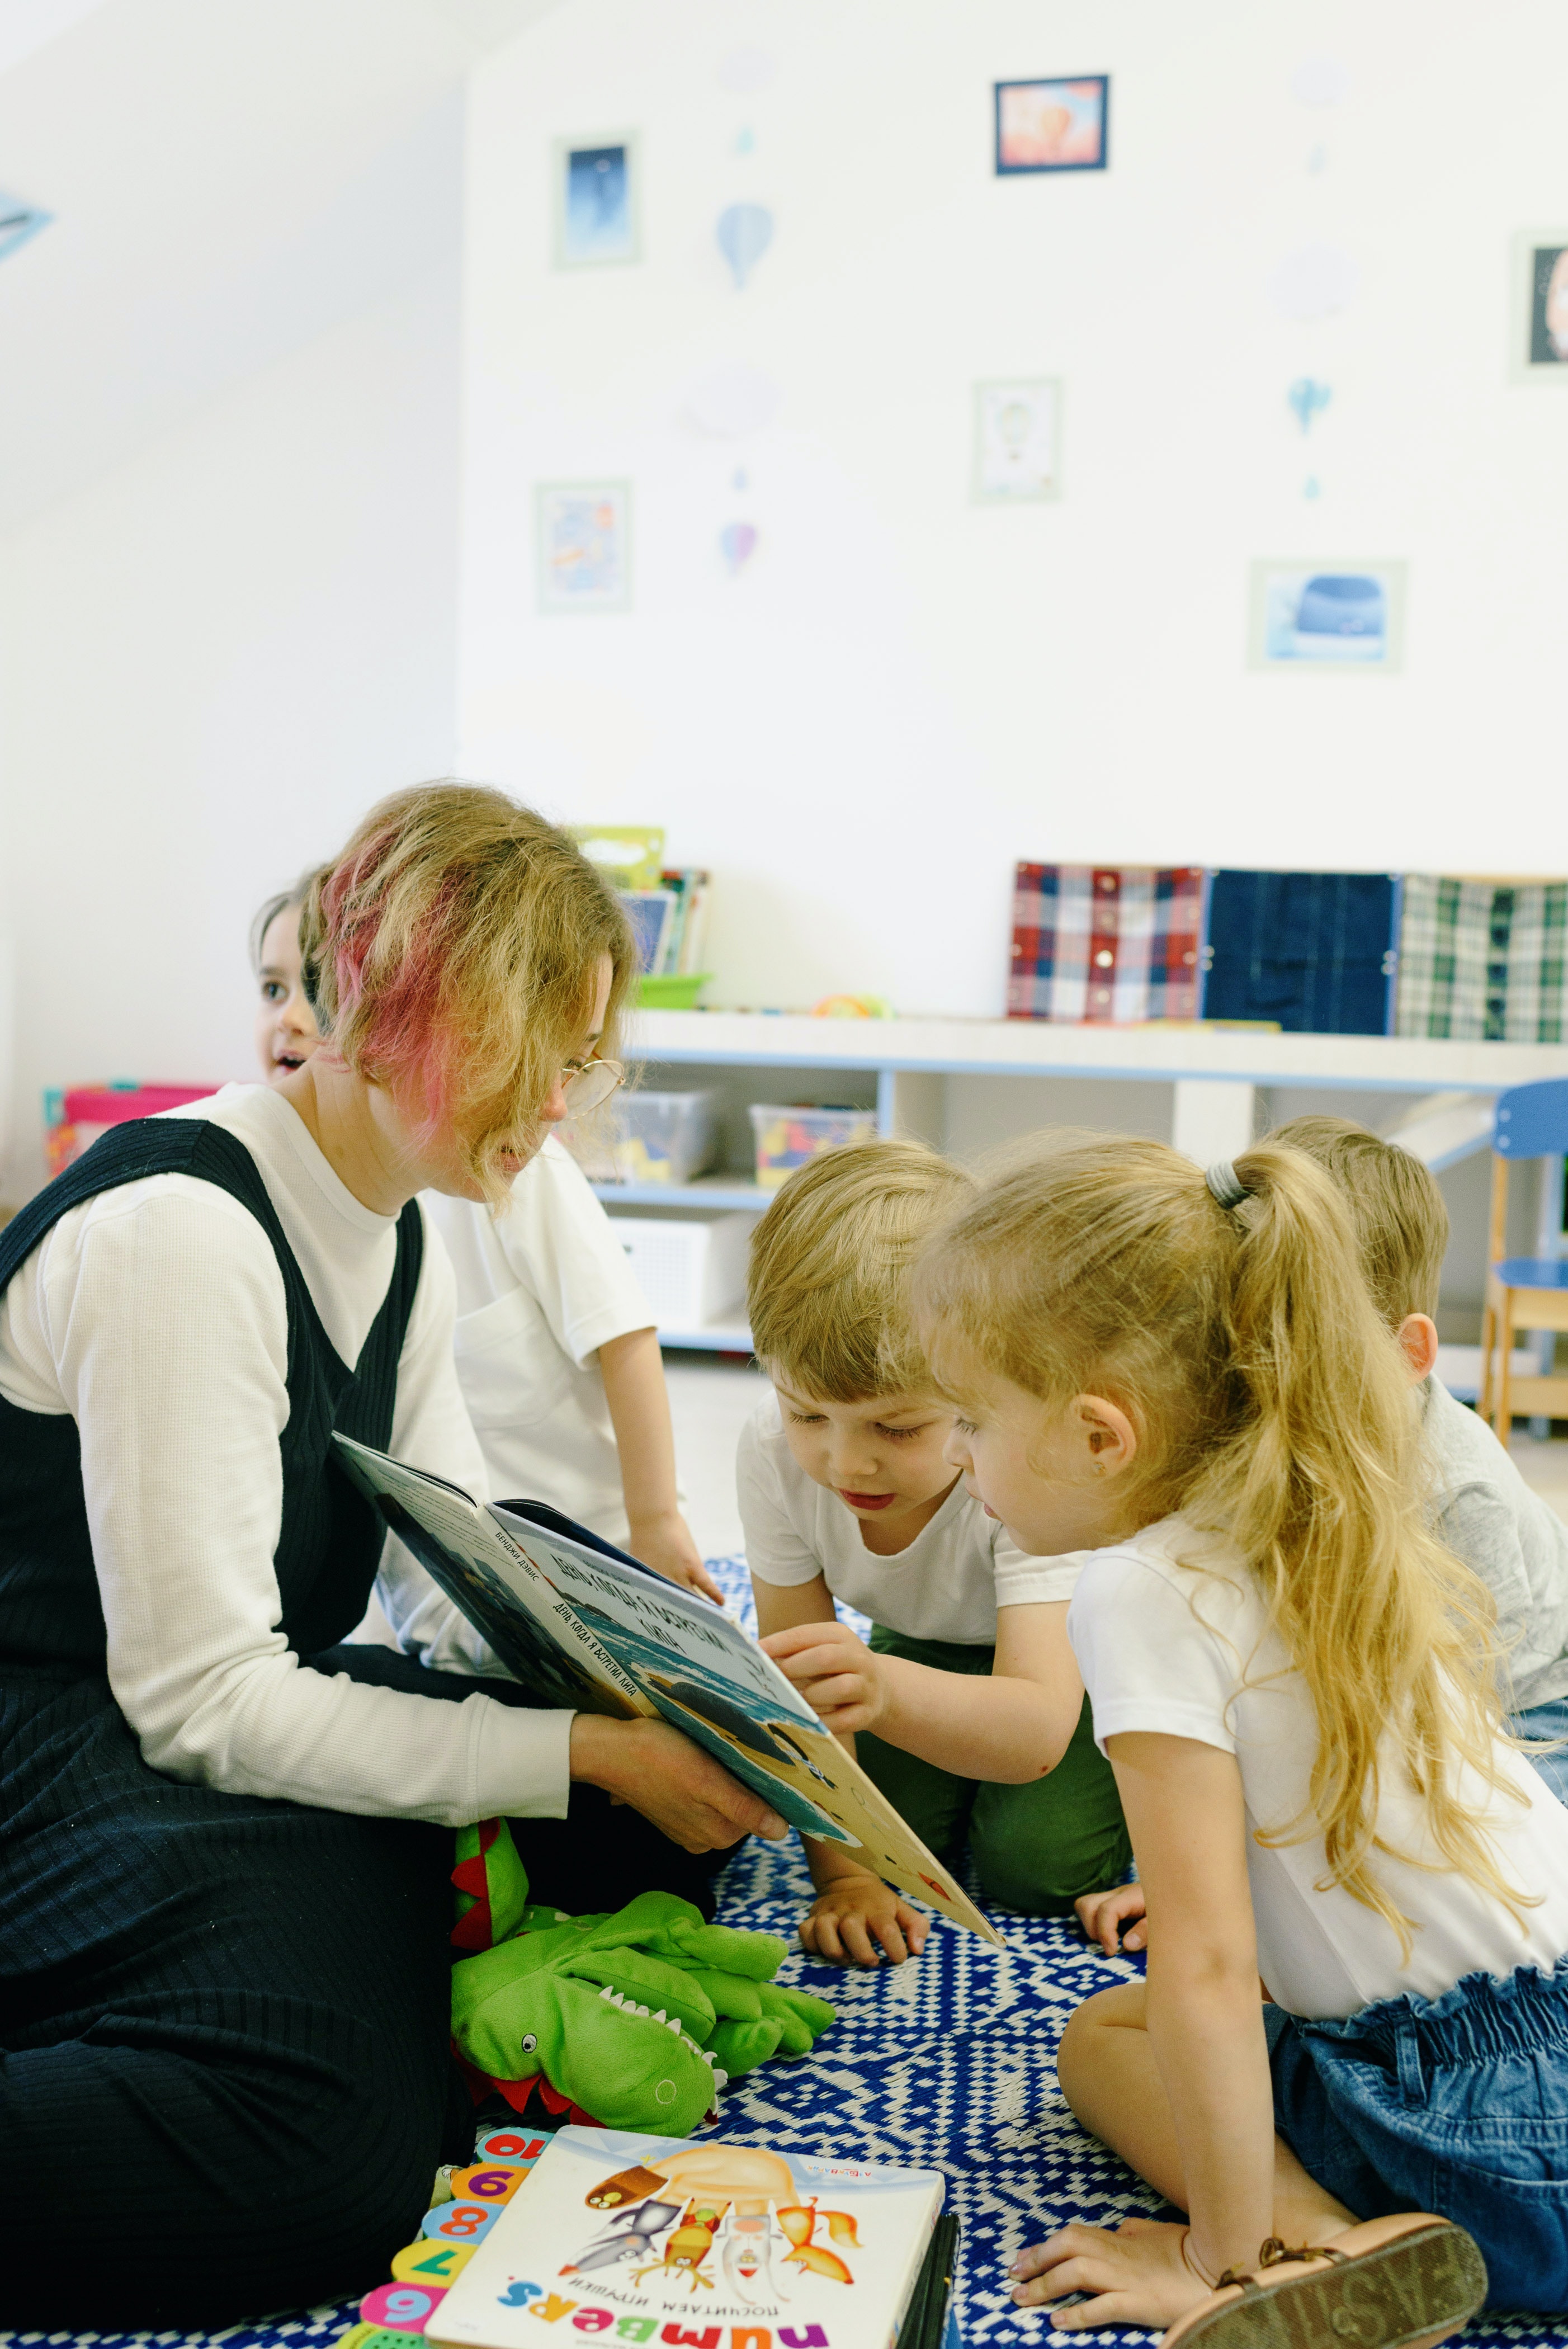 A blonde woman with a pink streak in her hair holds out a book to a group of children who are pointing and engaging with the text.